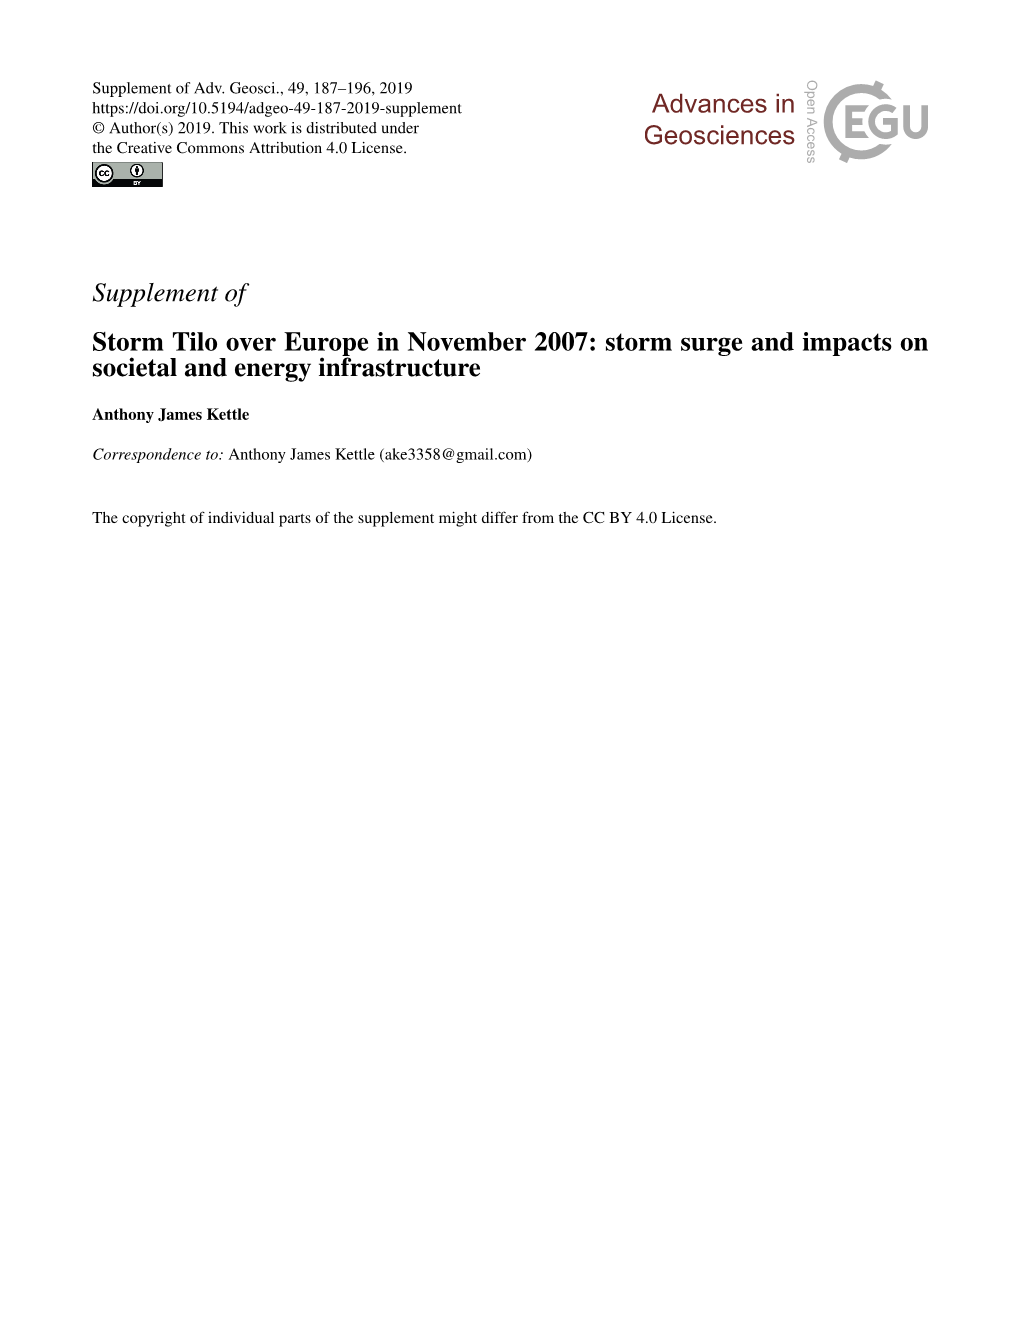 Supplement of Storm Tilo Over Europe in November 2007: Storm Surge and Impacts on Societal and Energy Infrastructure